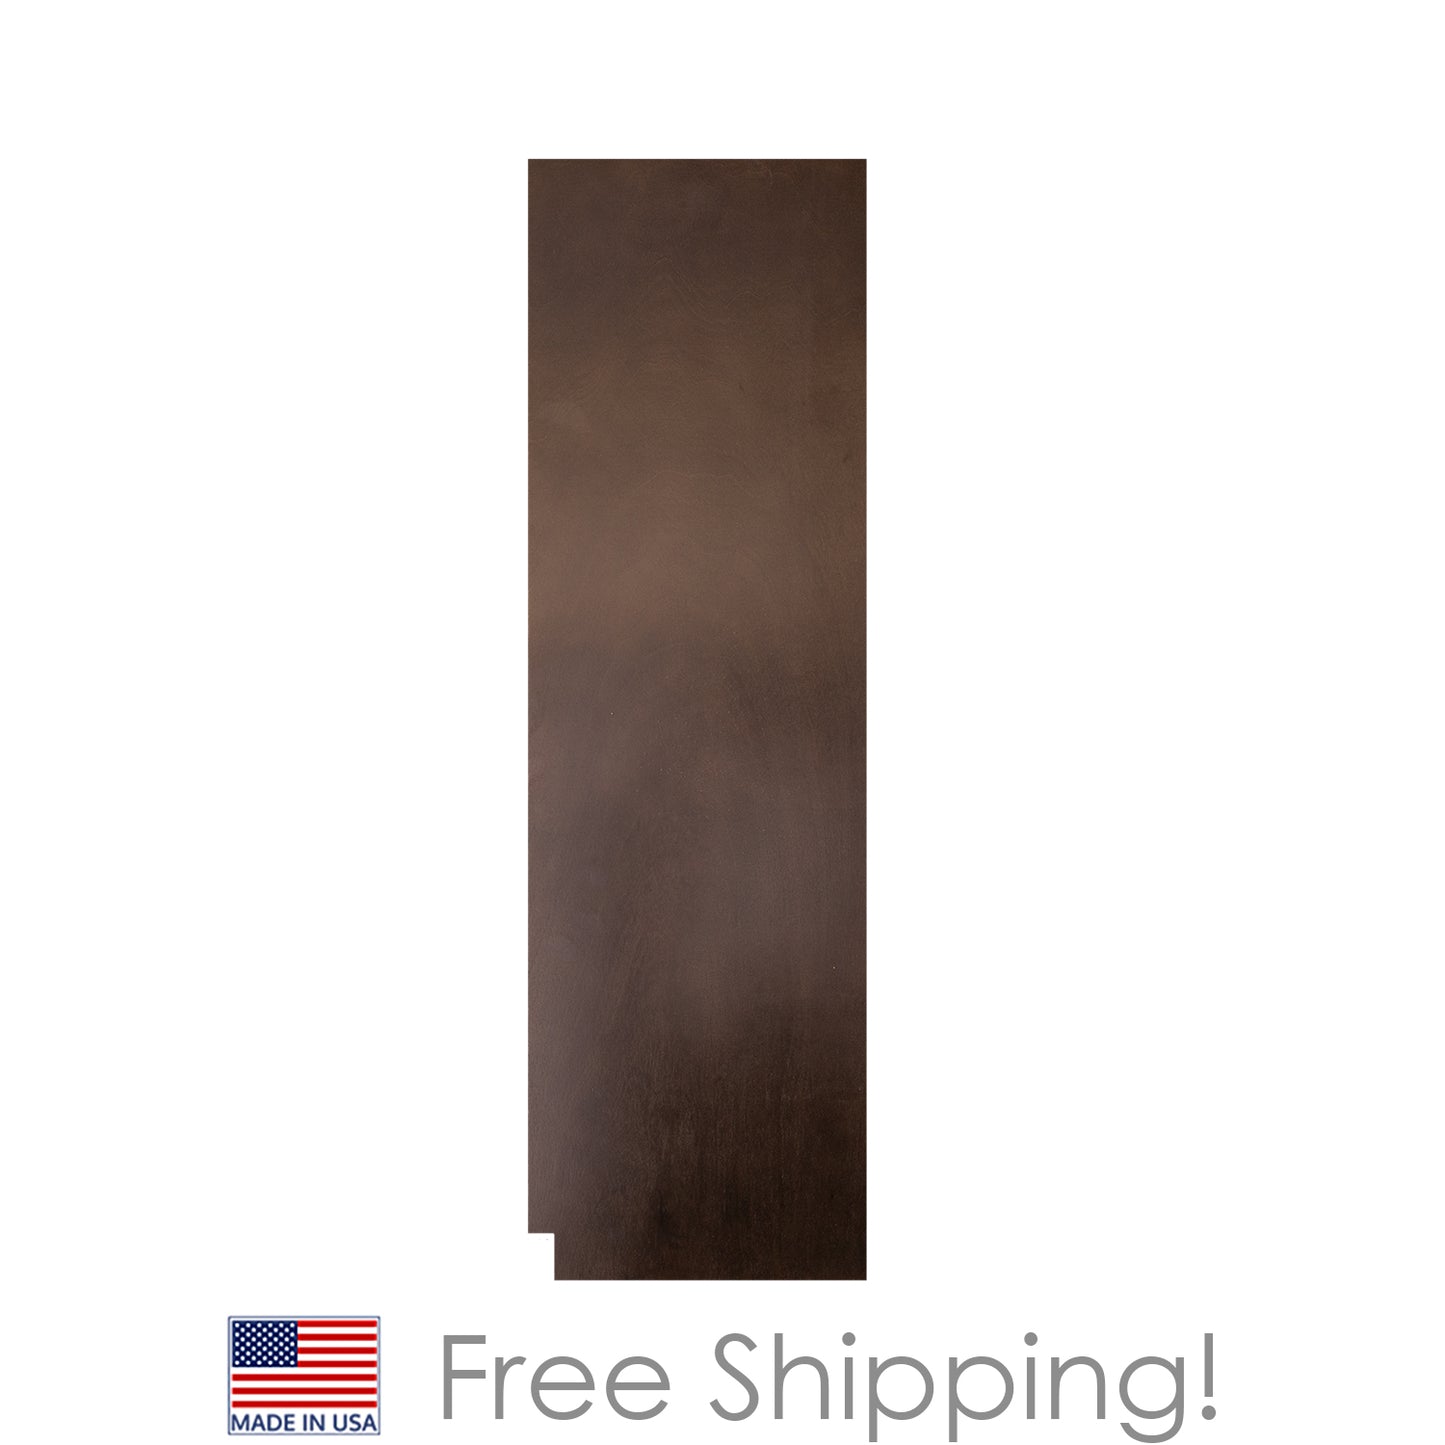 Quicklock RTA (Ready-to-Assemble) Espresso Stain .25"X23.25"X84" Pantry End Panel - Left Side